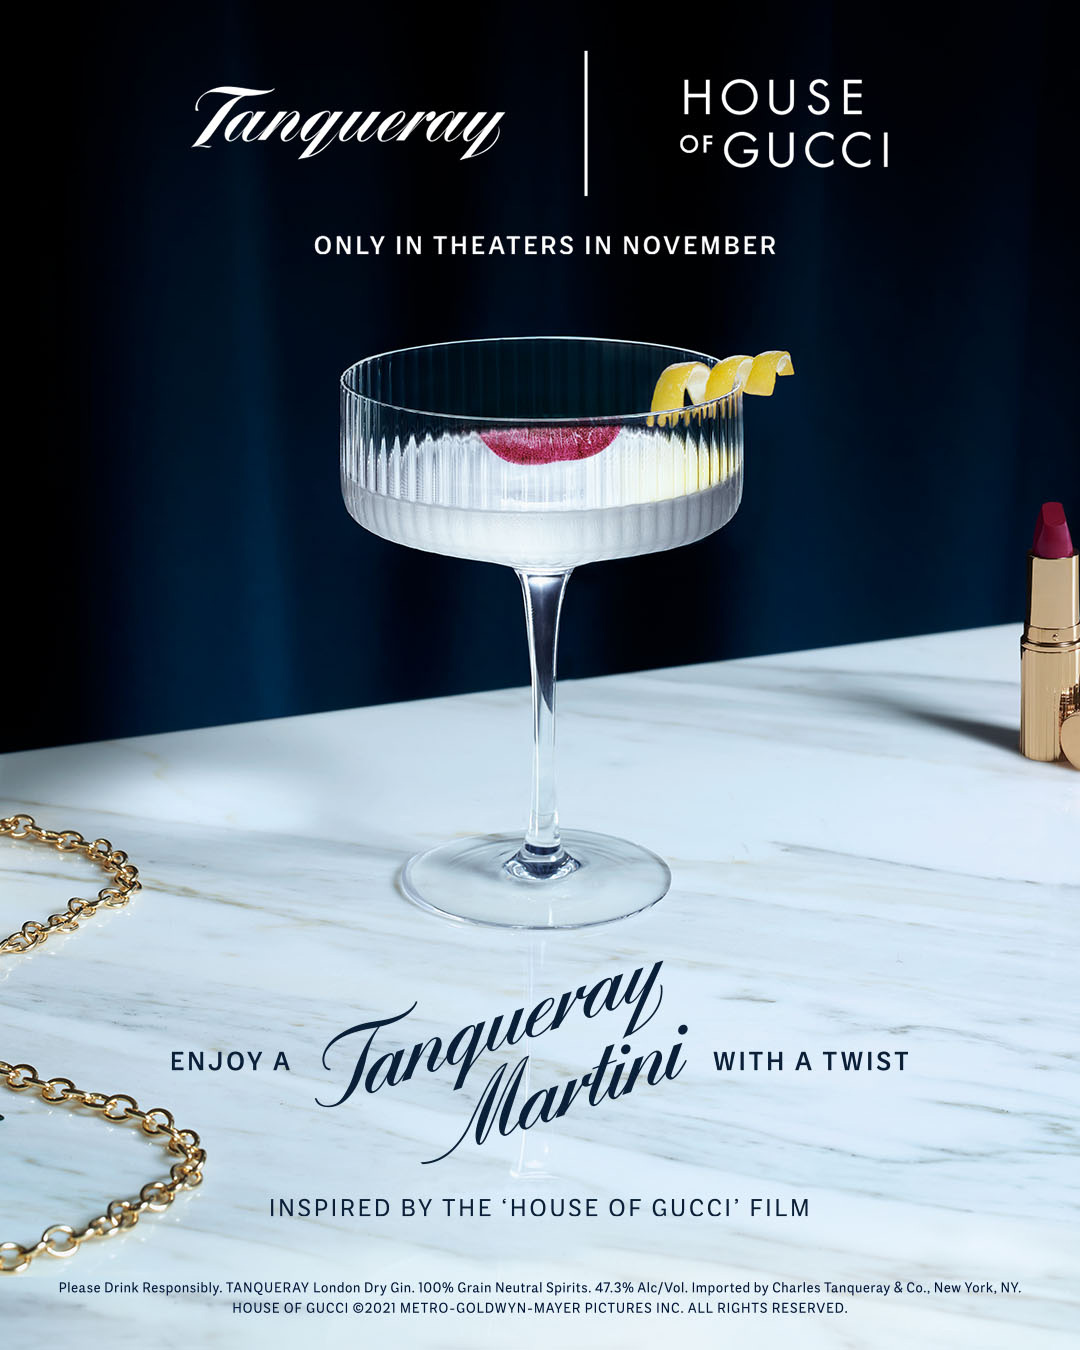 A Tanqueray Martini with a Twist Stars as a Pivotal Catalyst in MGM's House of Gucci Film.